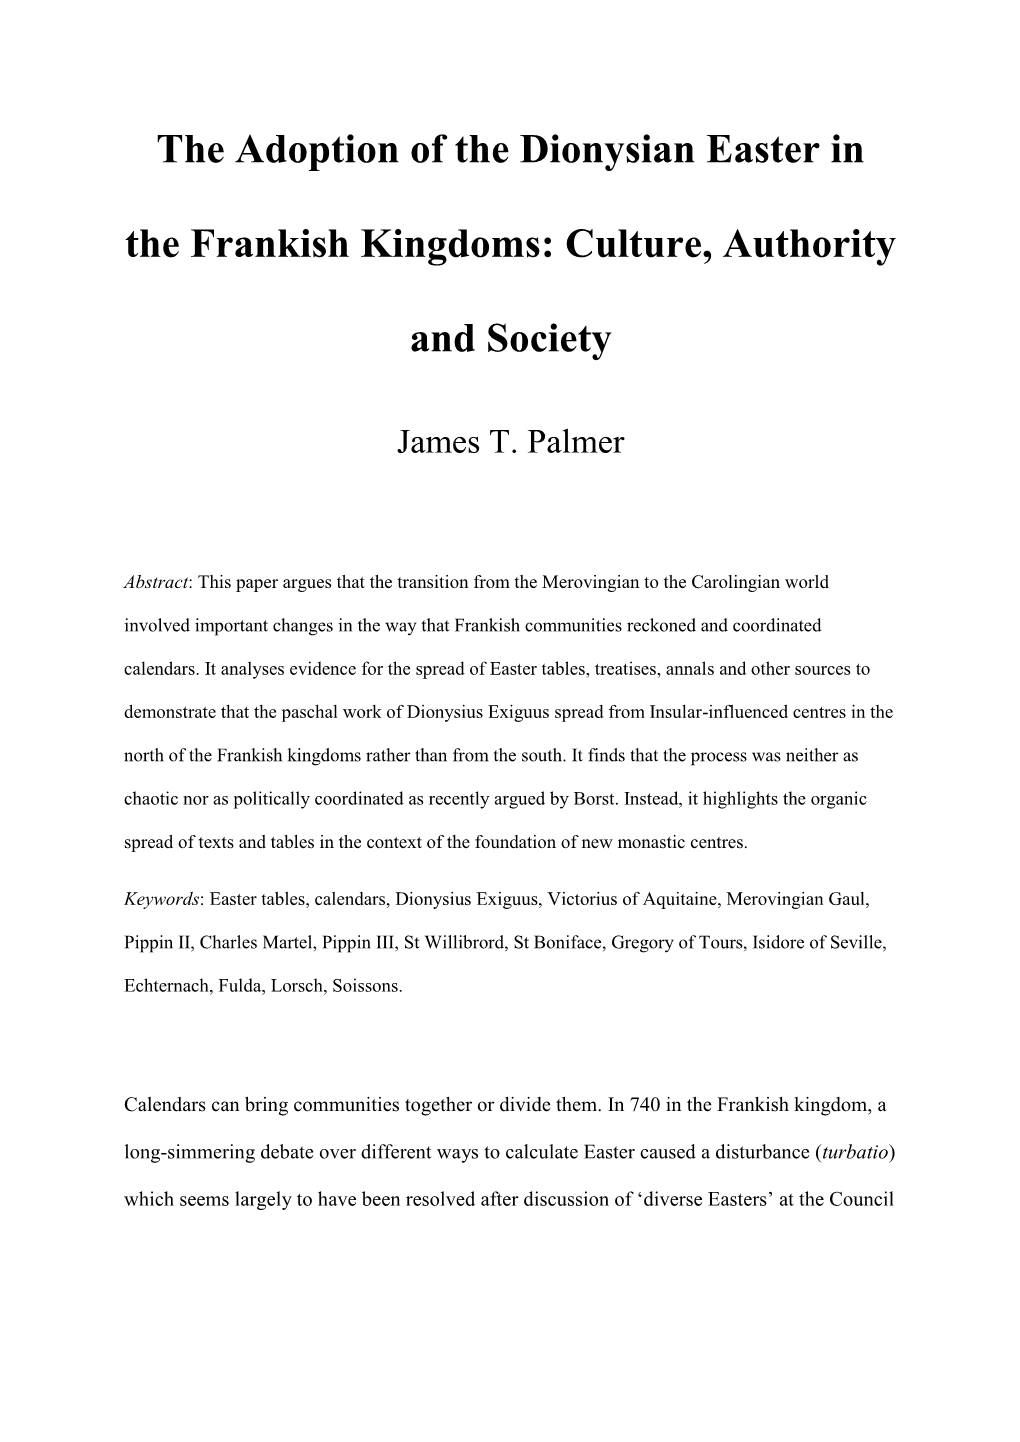 The Adoption of the Dionysian Easter in the Frankish Kingdoms: Culture, Authority